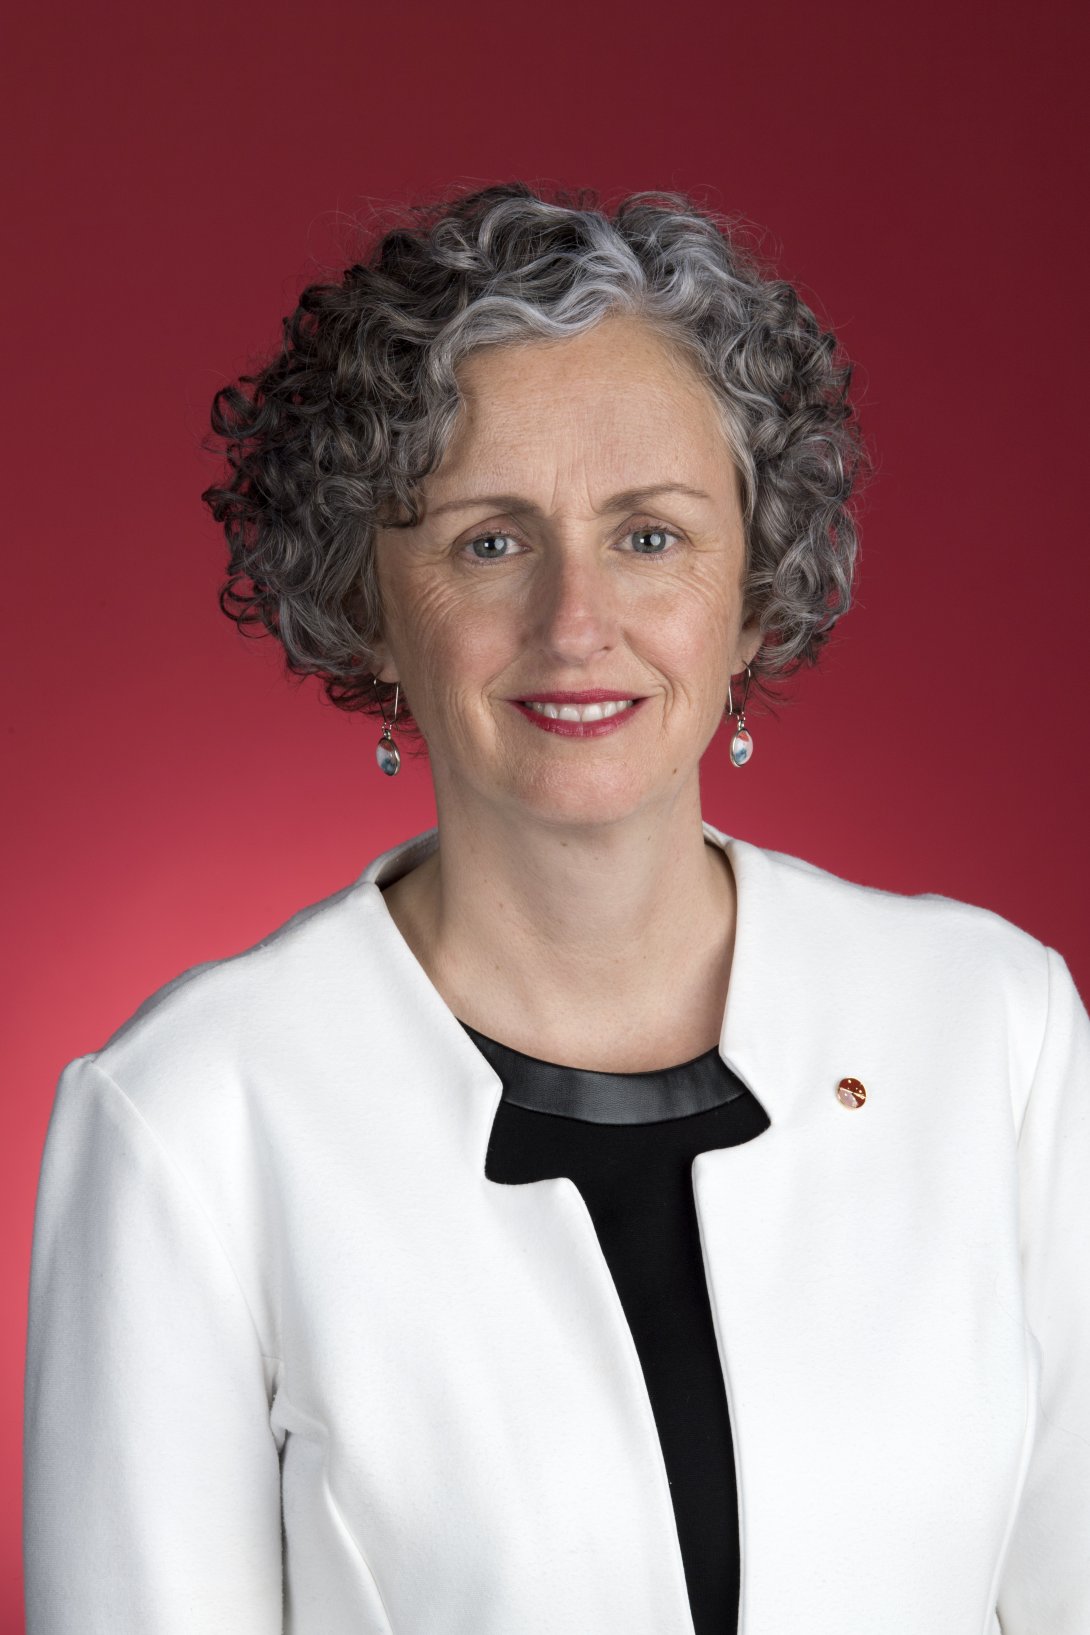 Photo portrait of woman with short curly hair wearing a black shirt and white blazer smiling